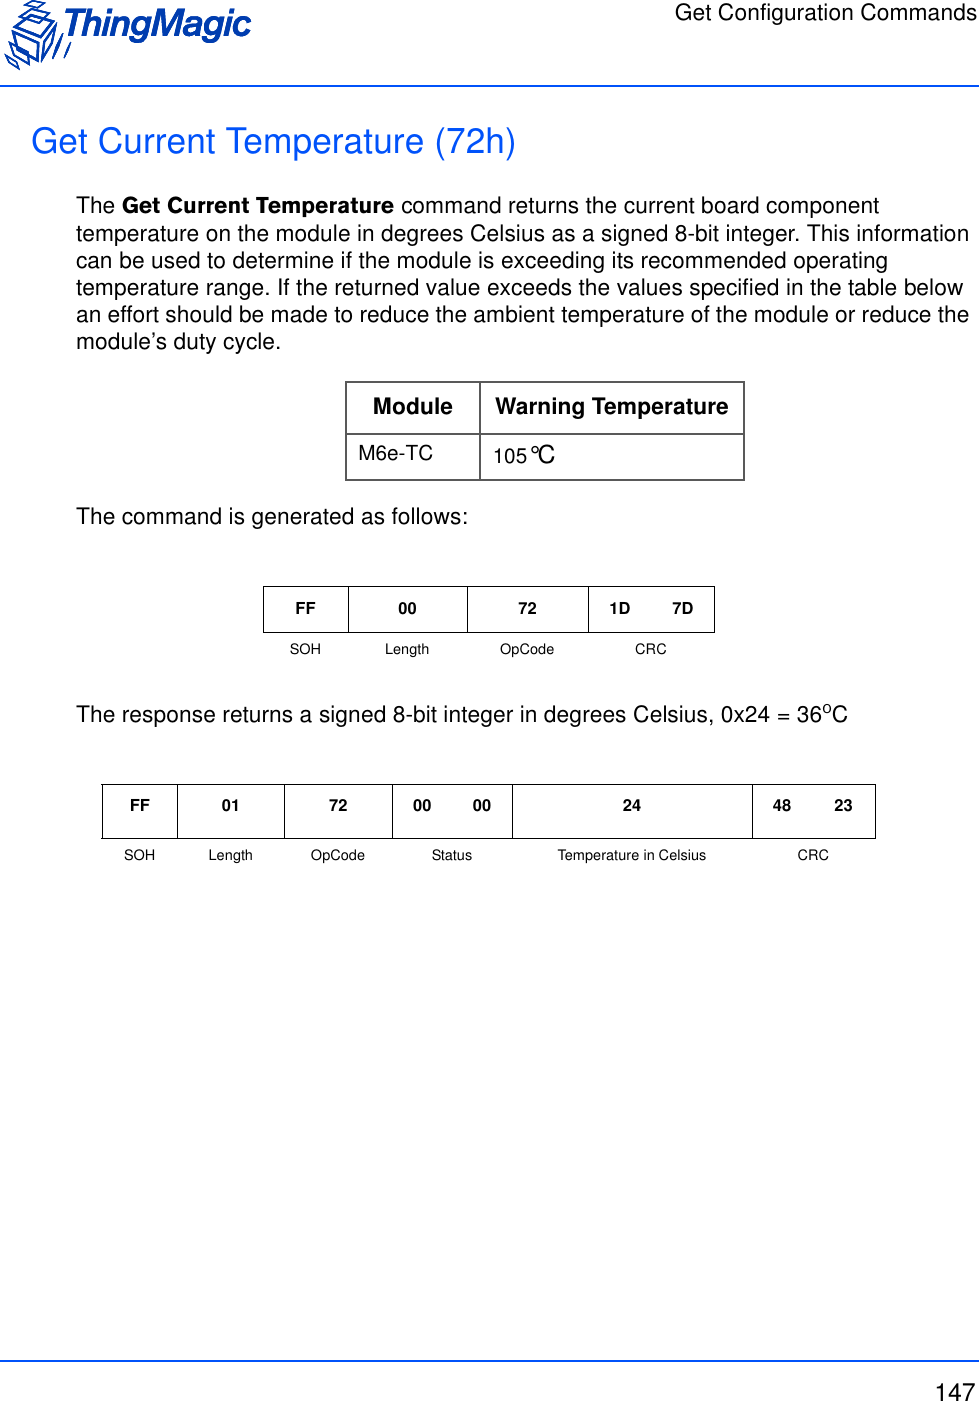 Get Configuration Commands147Get Current Temperature (72h) The Get Current Temperature command returns the current board component temperature on the module in degrees Celsius as a signed 8-bit integer. This information can be used to determine if the module is exceeding its recommended operating temperature range. If the returned value exceeds the values specified in the table below an effort should be made to reduce the ambient temperature of the module or reduce the module’s duty cycle. The command is generated as follows:The response returns a signed 8-bit integer in degrees Celsius, 0x24 = 36oCModule Warning TemperatureM6e-TC 105°CFF 00 72 1D 7DSOH Length OpCode CRCFF 01 72 00 00 24 48 23SOH Length OpCode Status Temperature in Celsius CRC